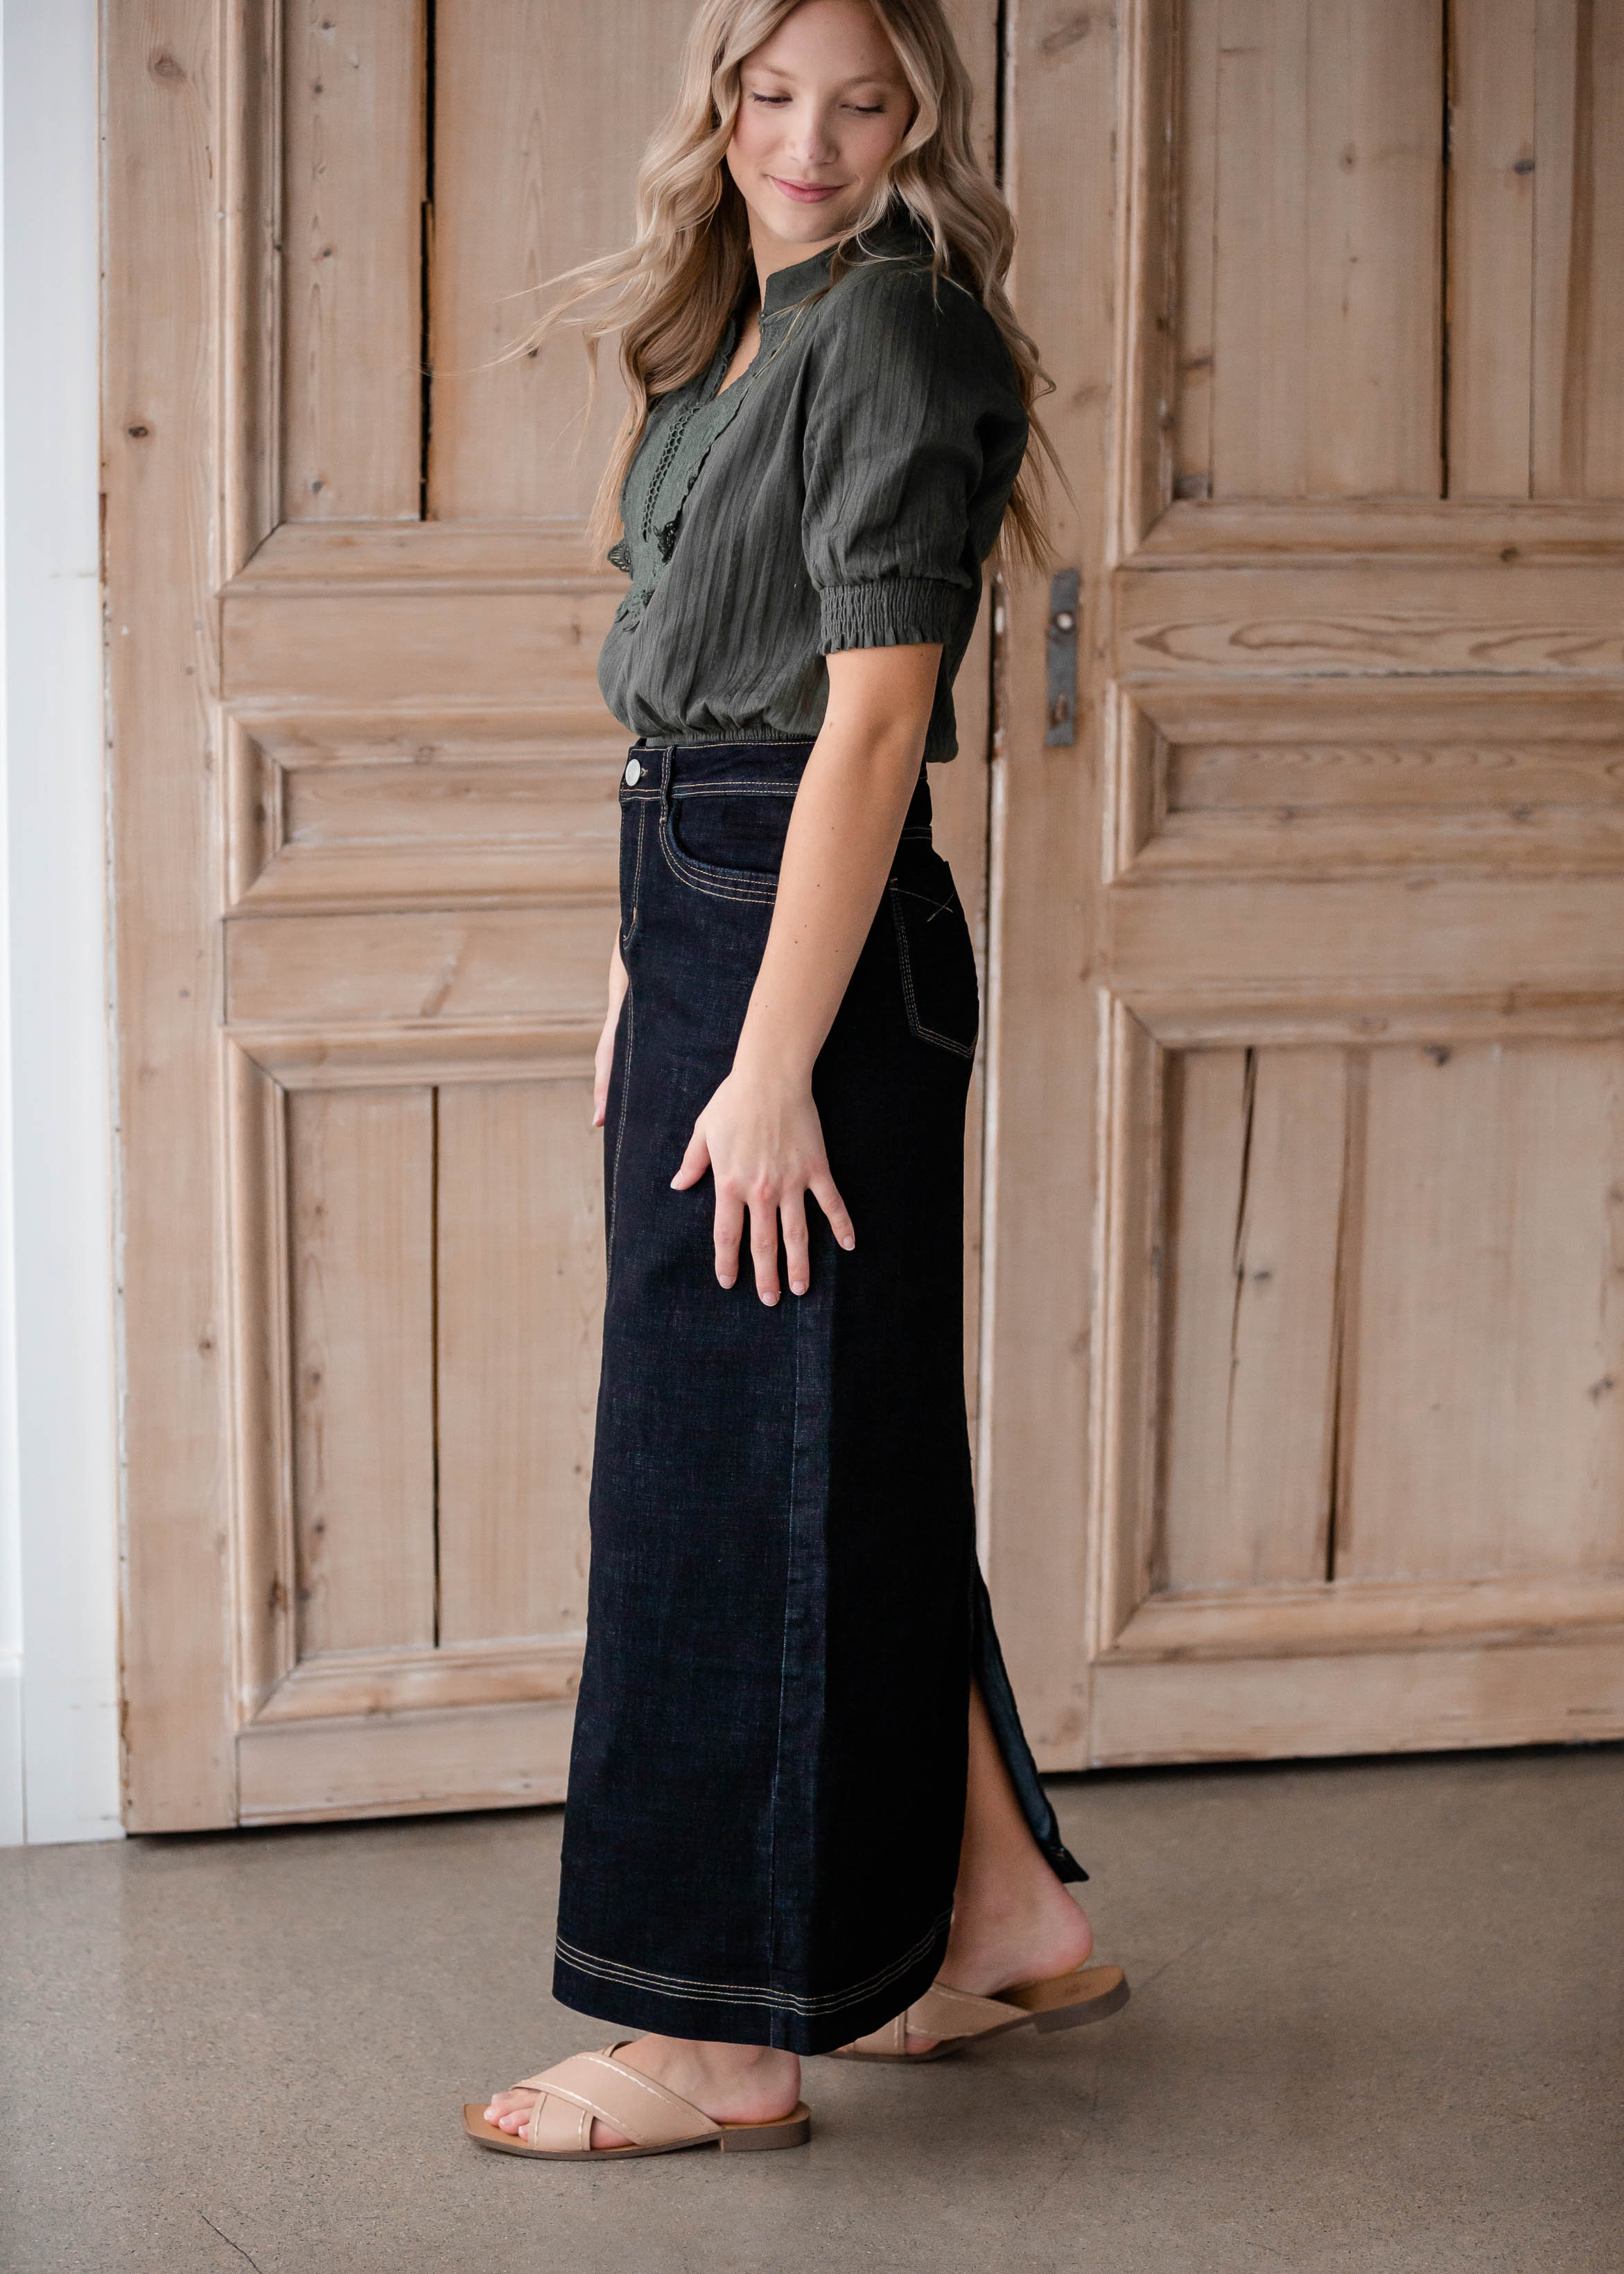 High Waist Hip Wrapped Denim Midi Dress With Pockets And Irregular Hemline  Perfect For Office And Formal Events From Shacksla, $17.59 | DHgate.Com